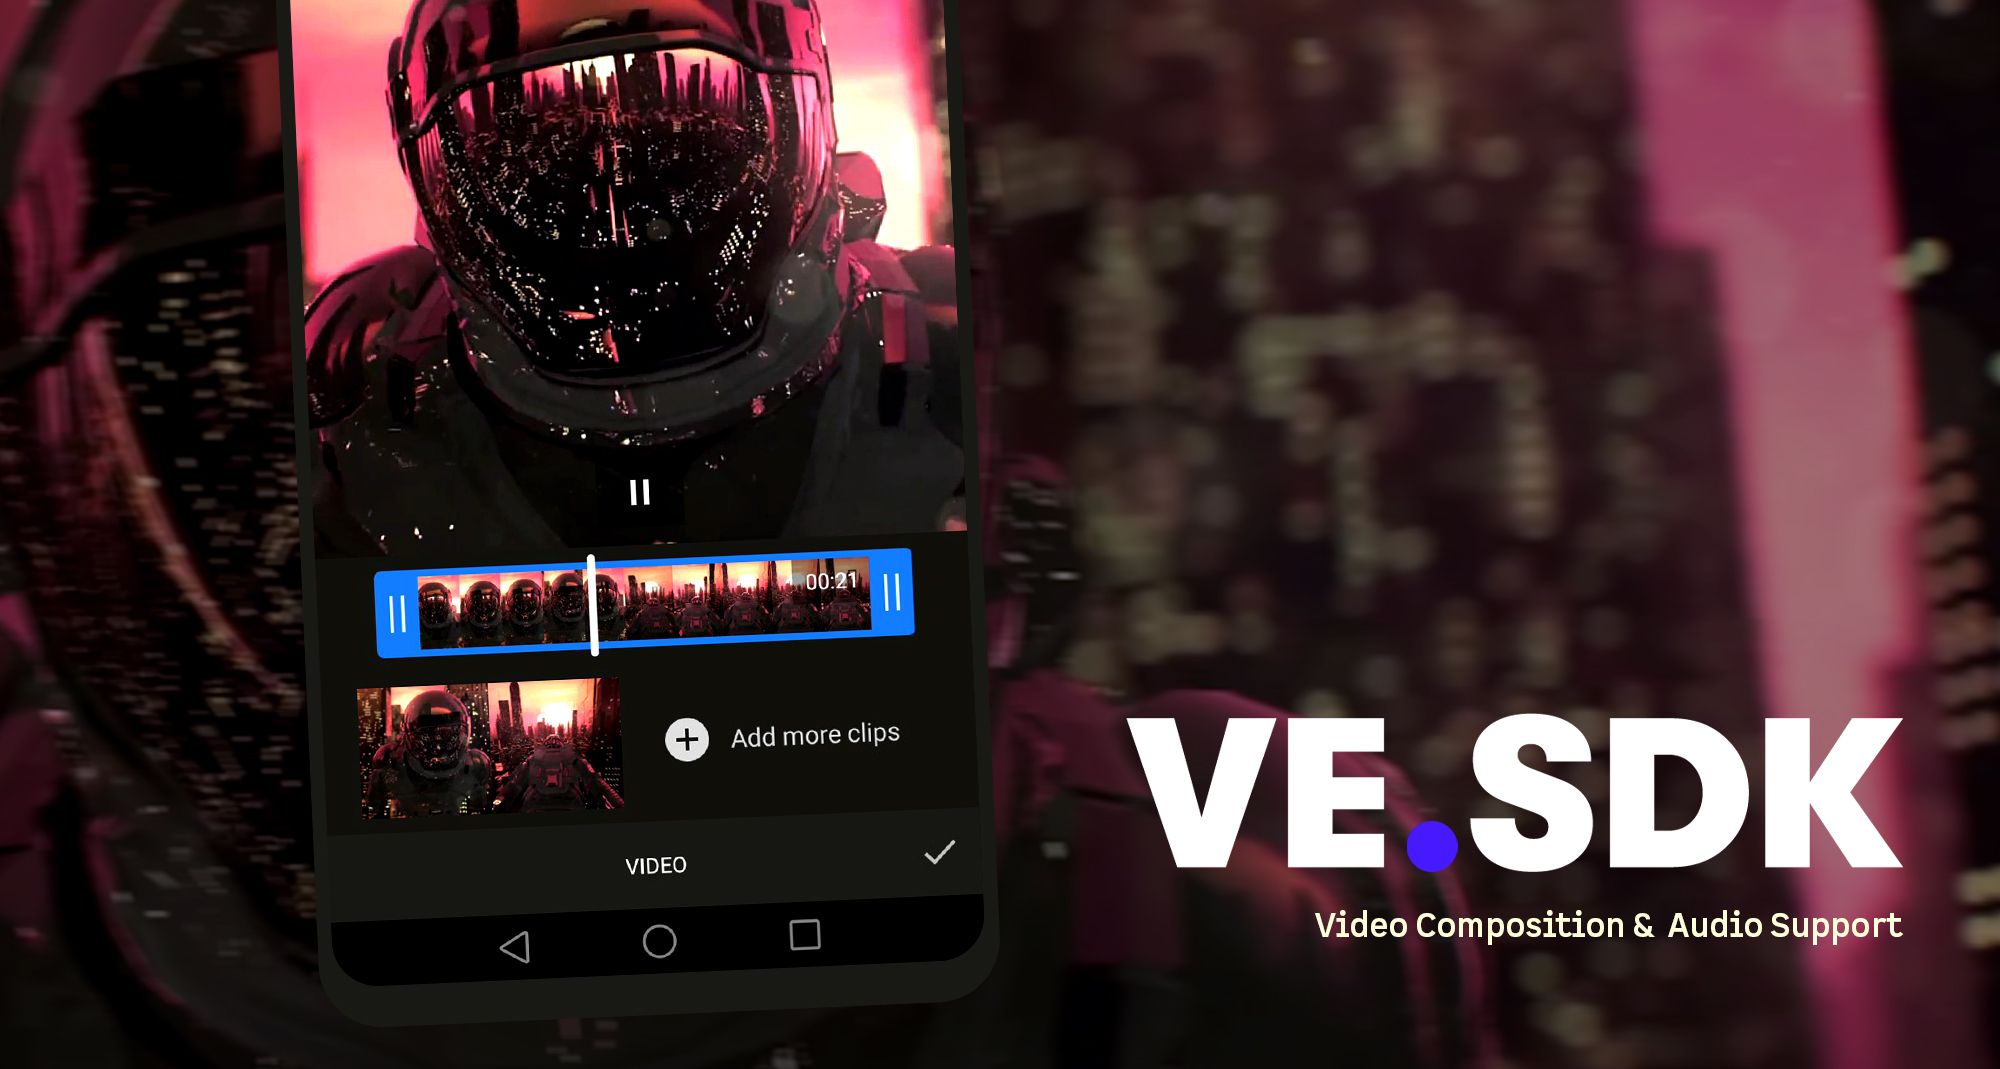 Video Composition and Audio Support for VE.SDK